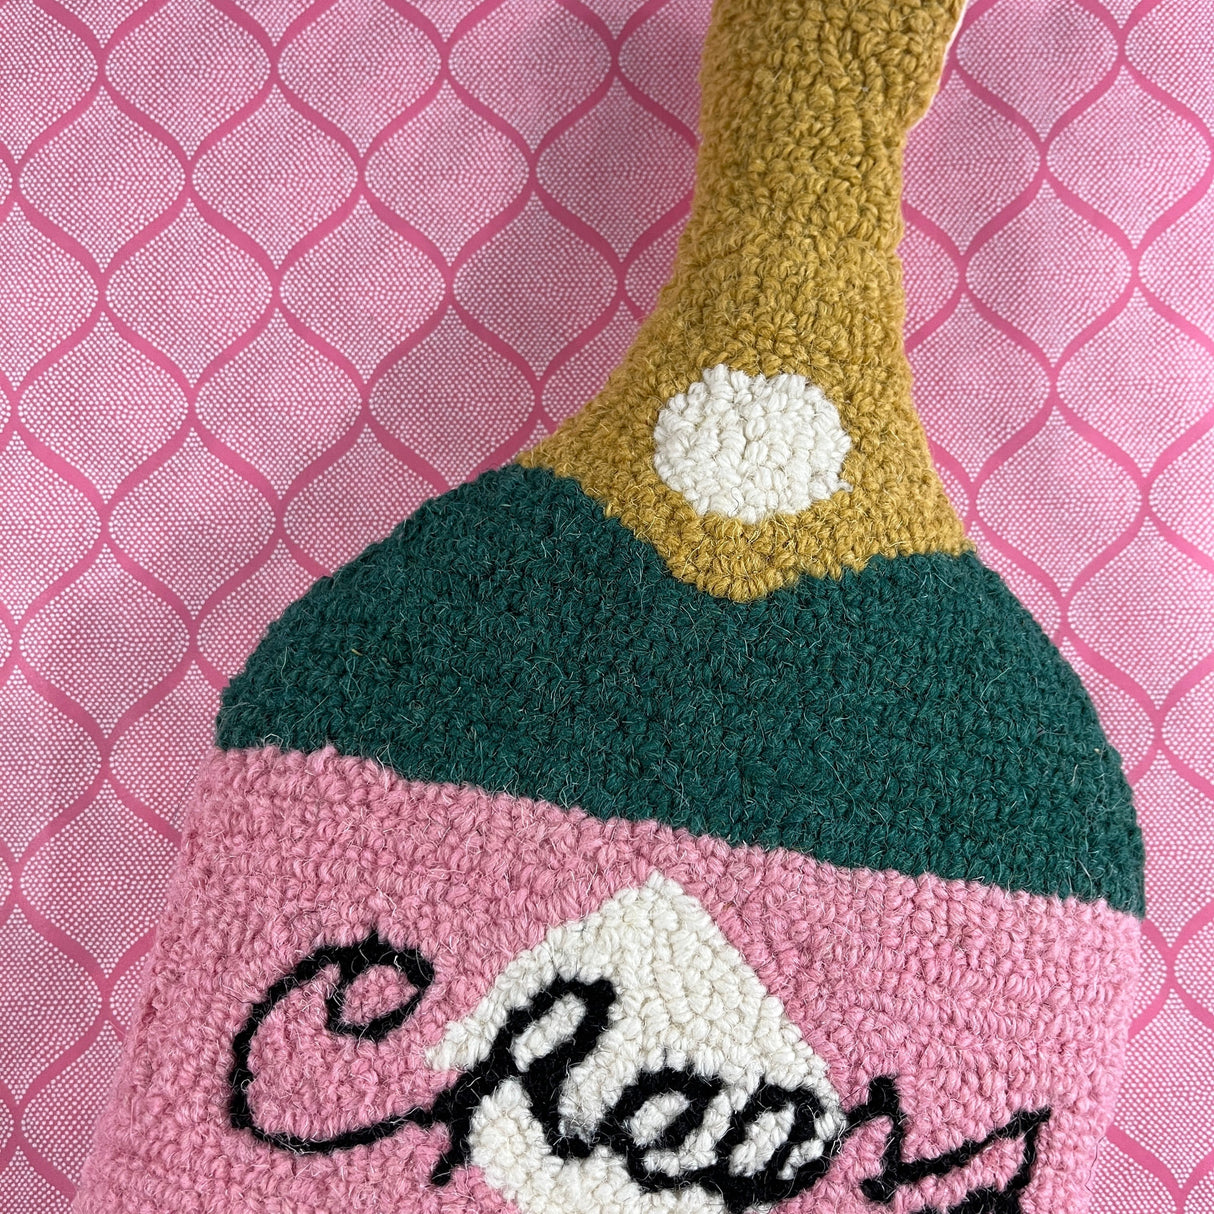 Champagne Bottle 16" x 9" Hooked-Wool Pillow